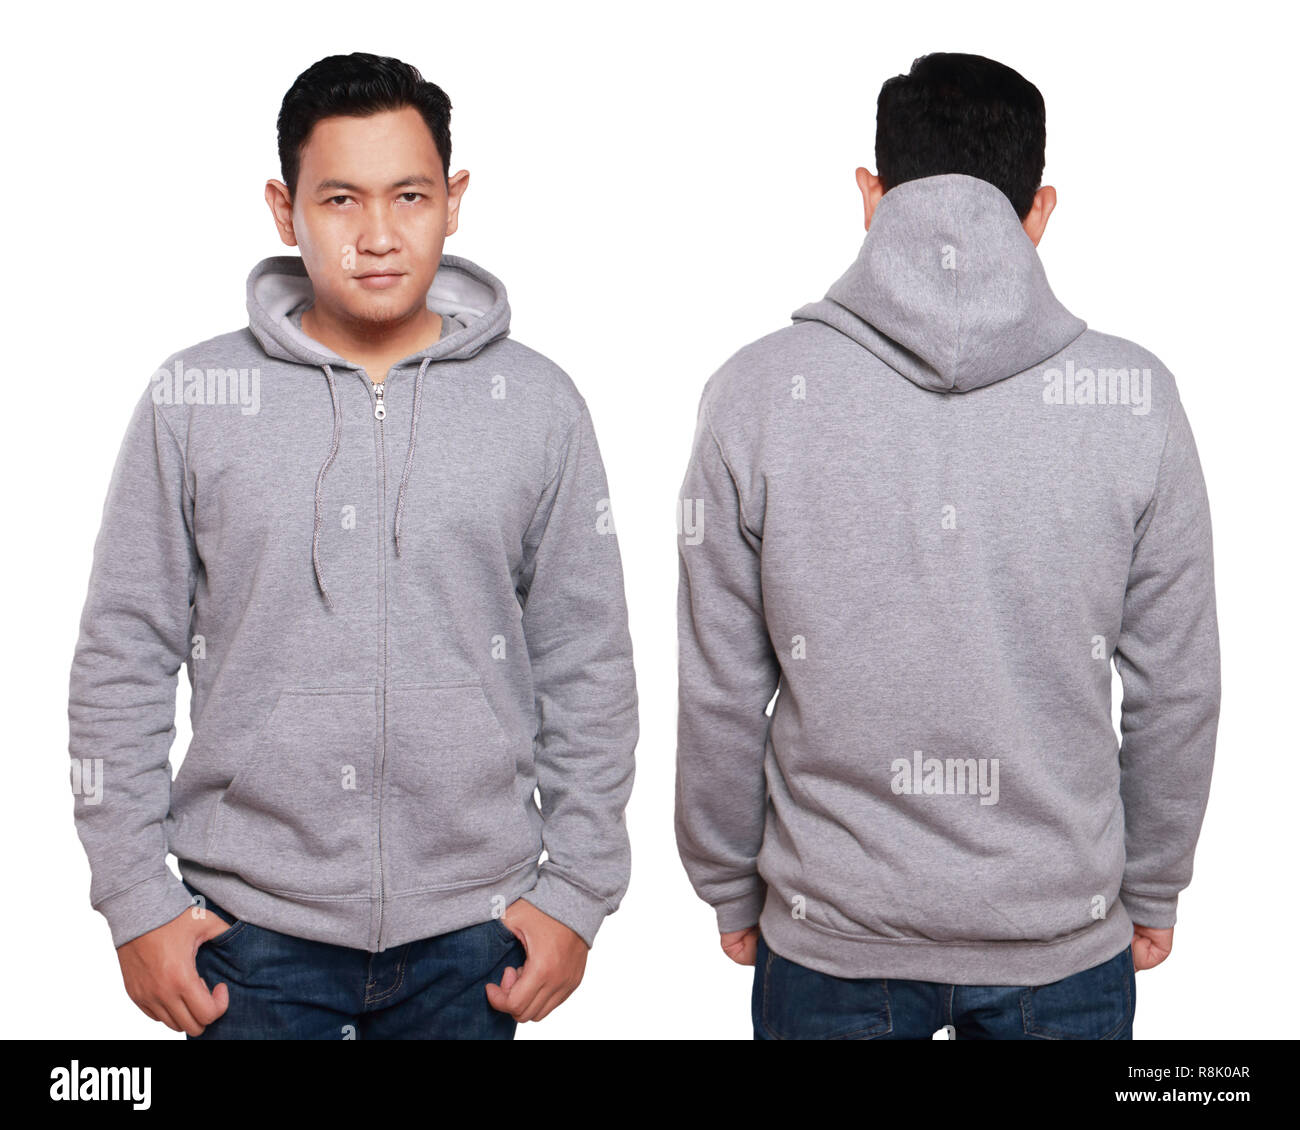 Download 50+ Mens Pullover Hoodie Mockup Back View Pictures ...